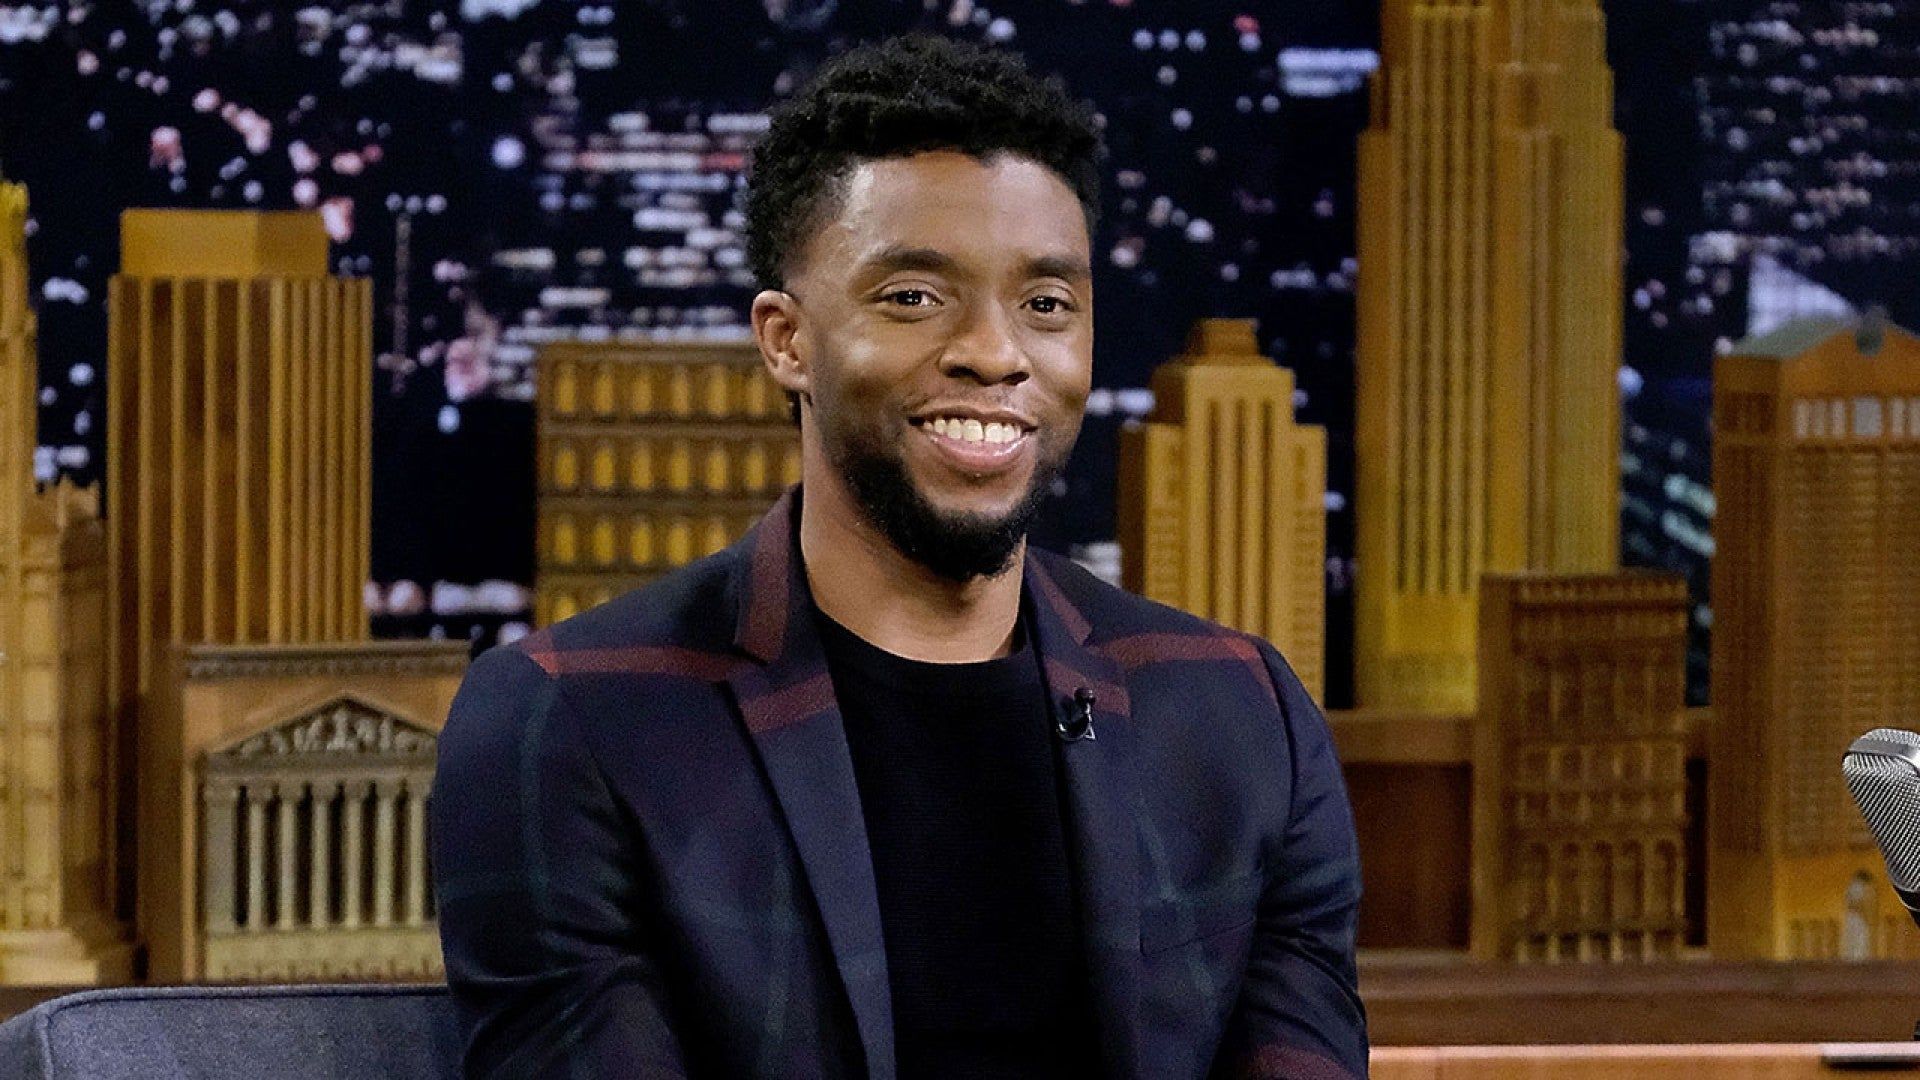 Chadwick Boseman Dead at 43: Sterling K. Brown, Kerry Washington & More Celebs Pay Tribute to Actor